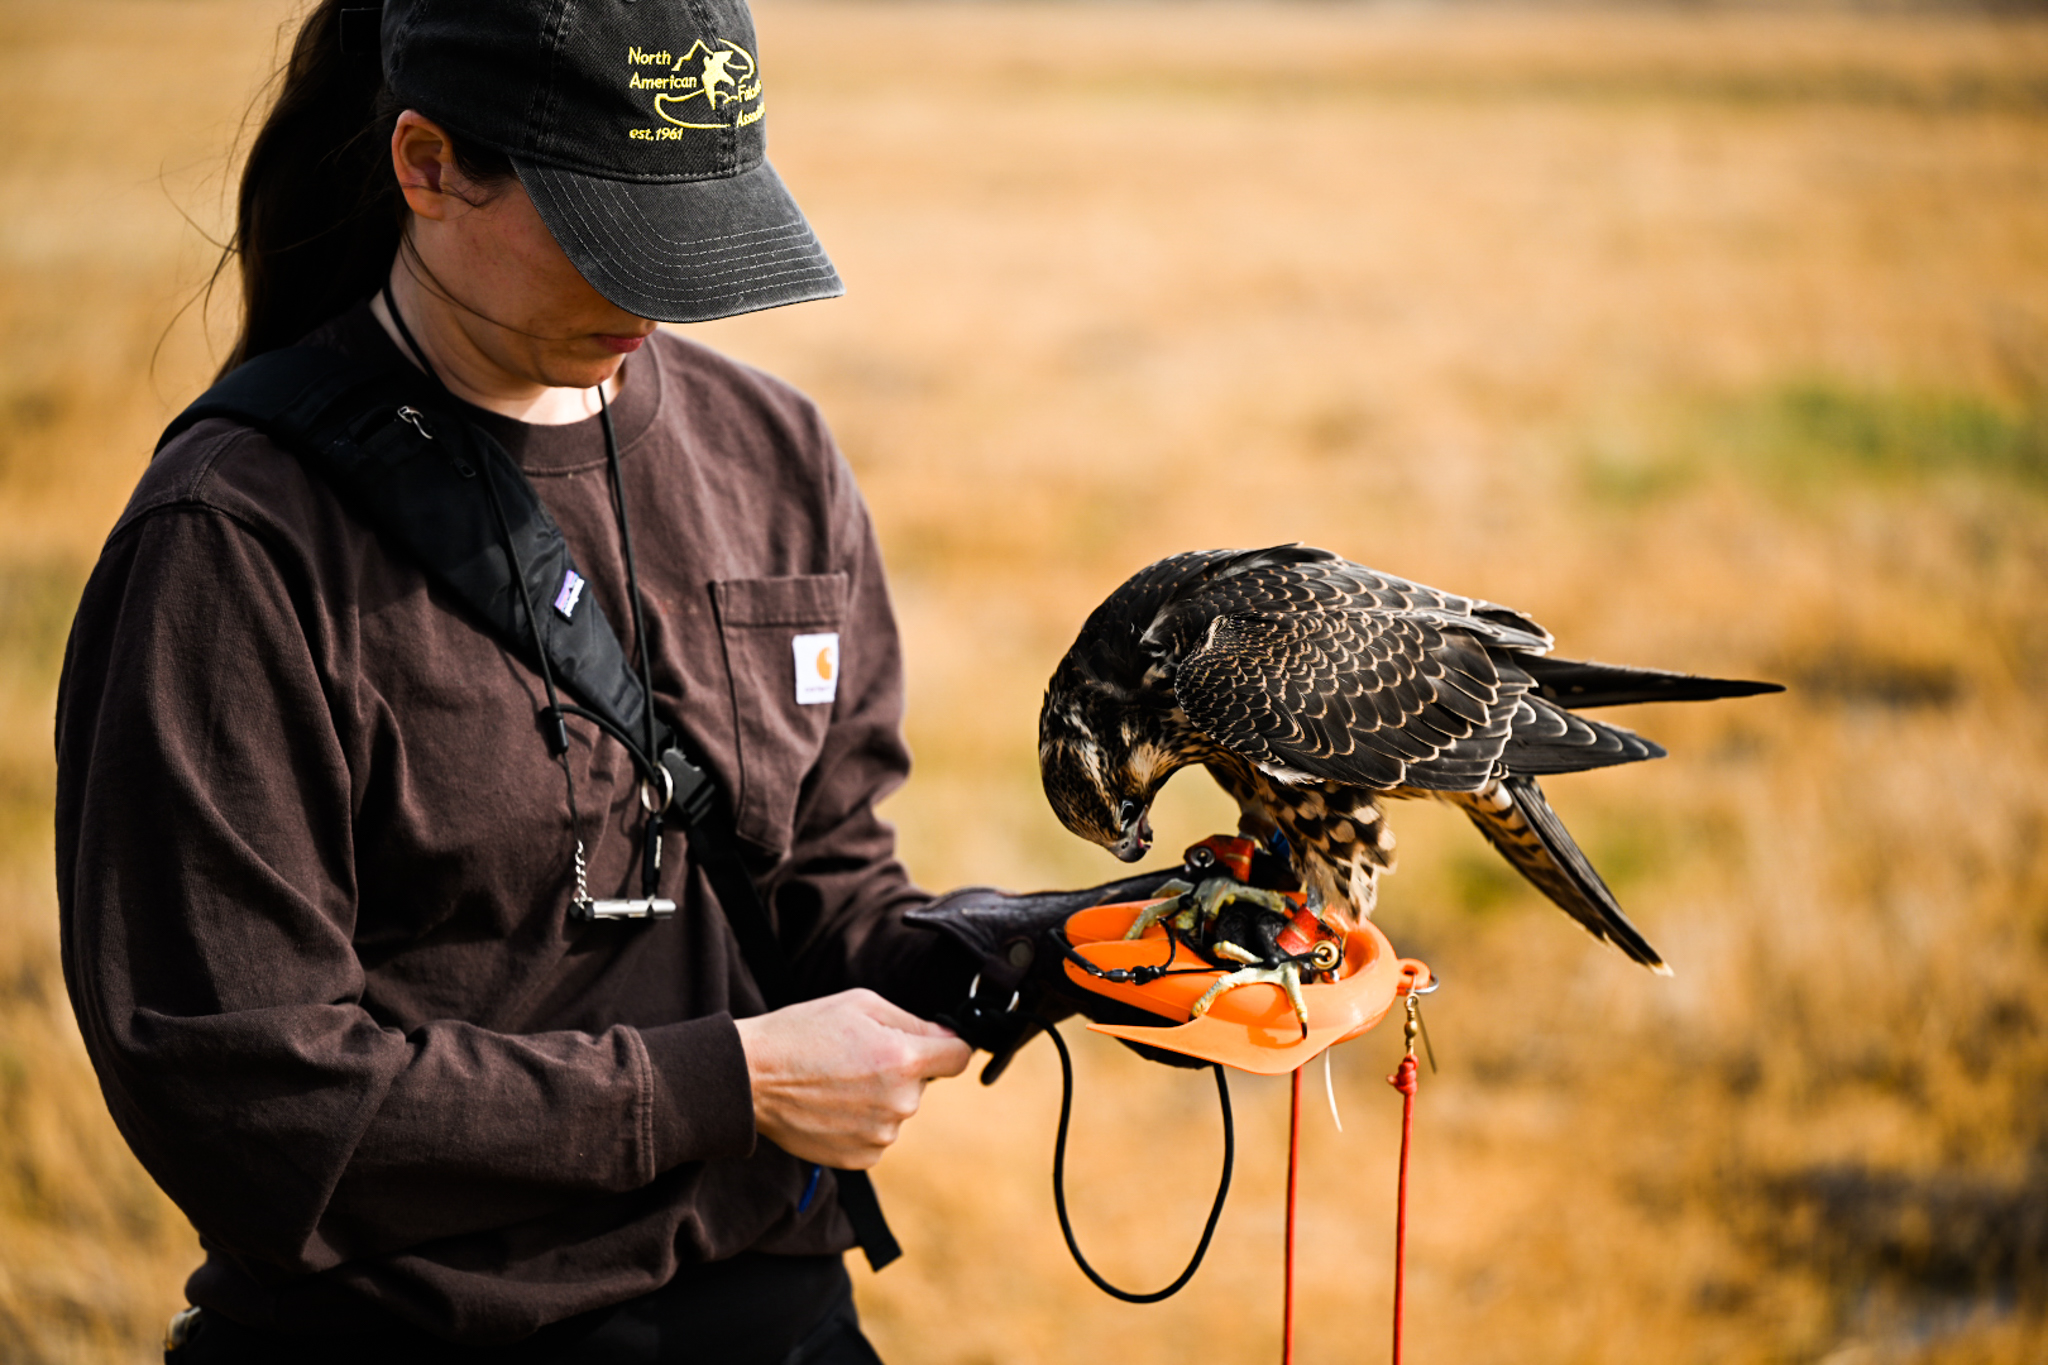 Britt Perry rewards her peregrine falcon, Crabcakes, after a difficult chase with a snipe